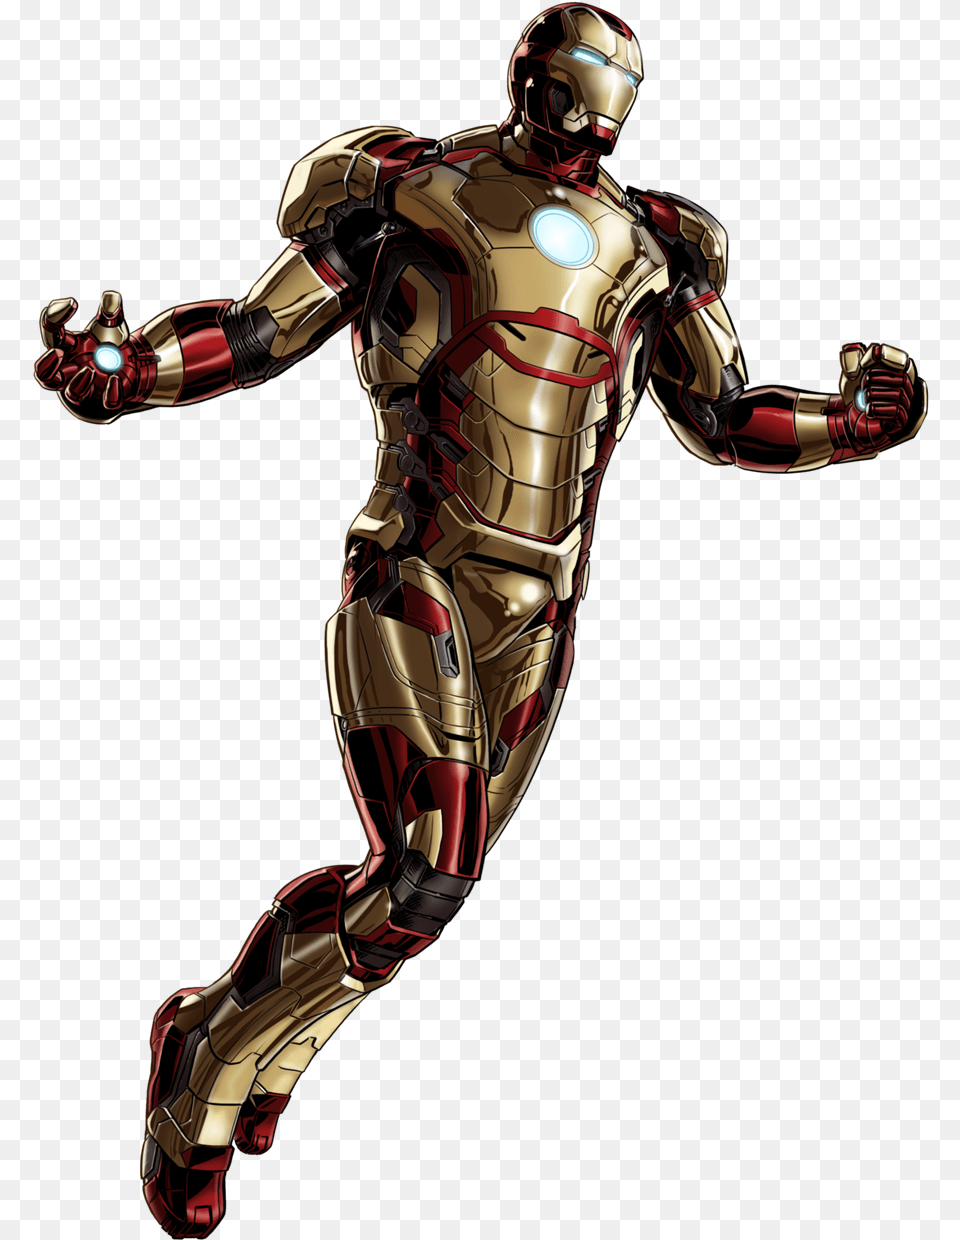 Iron Man Marvel Avengers Alliance, Adult, Armor, Male, Person Png Image